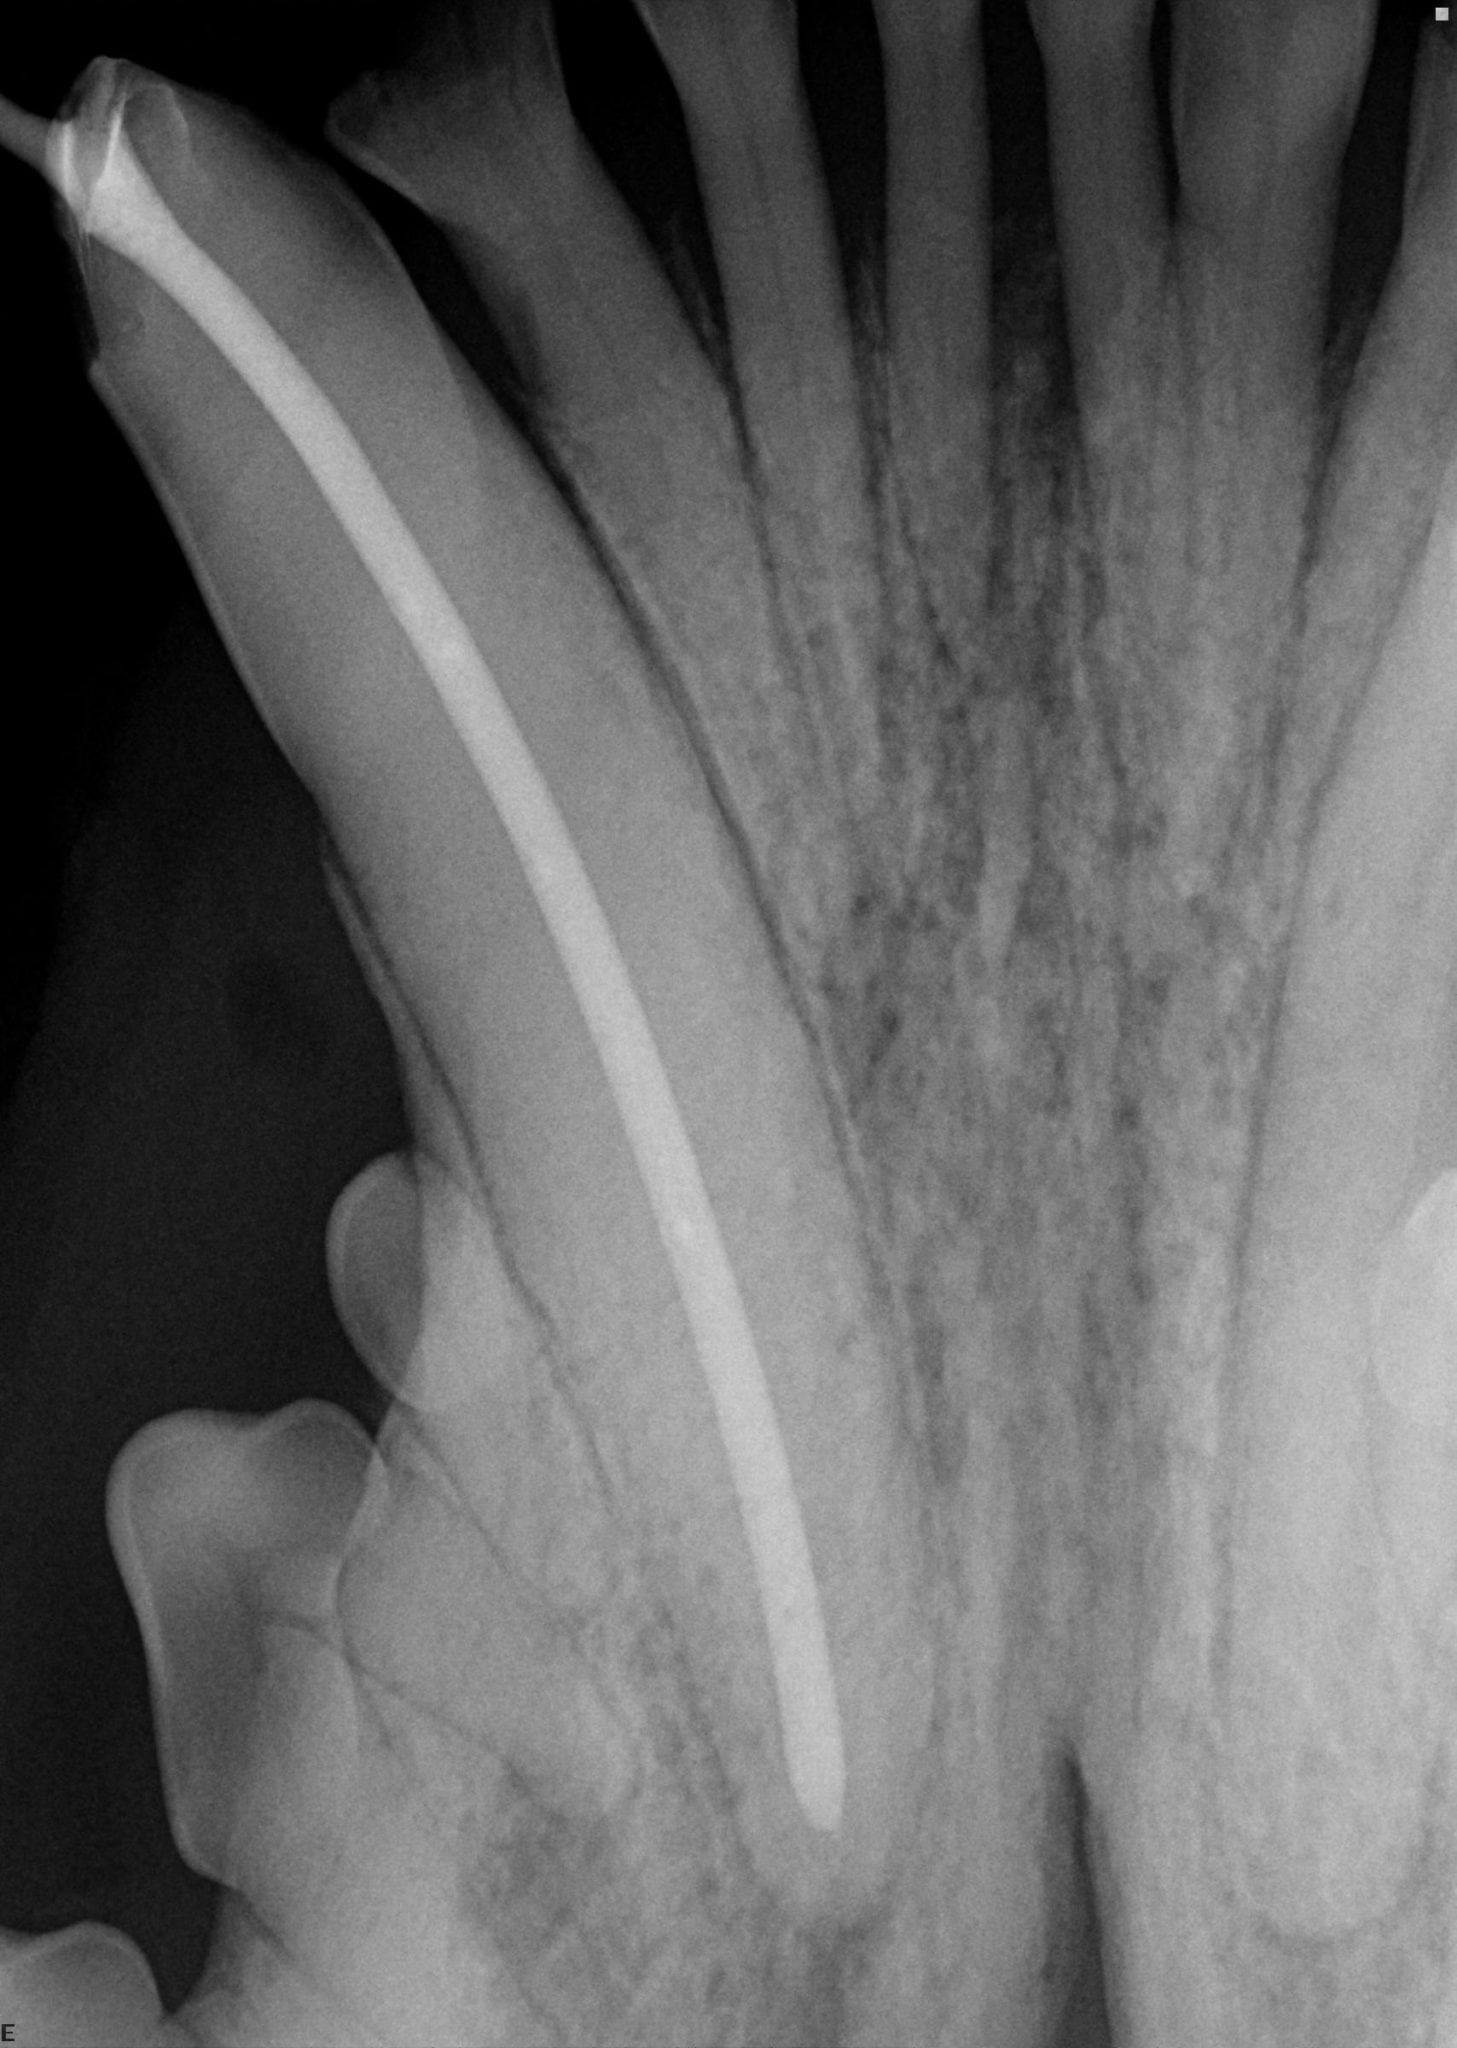 Dog Root Canal X-Ray